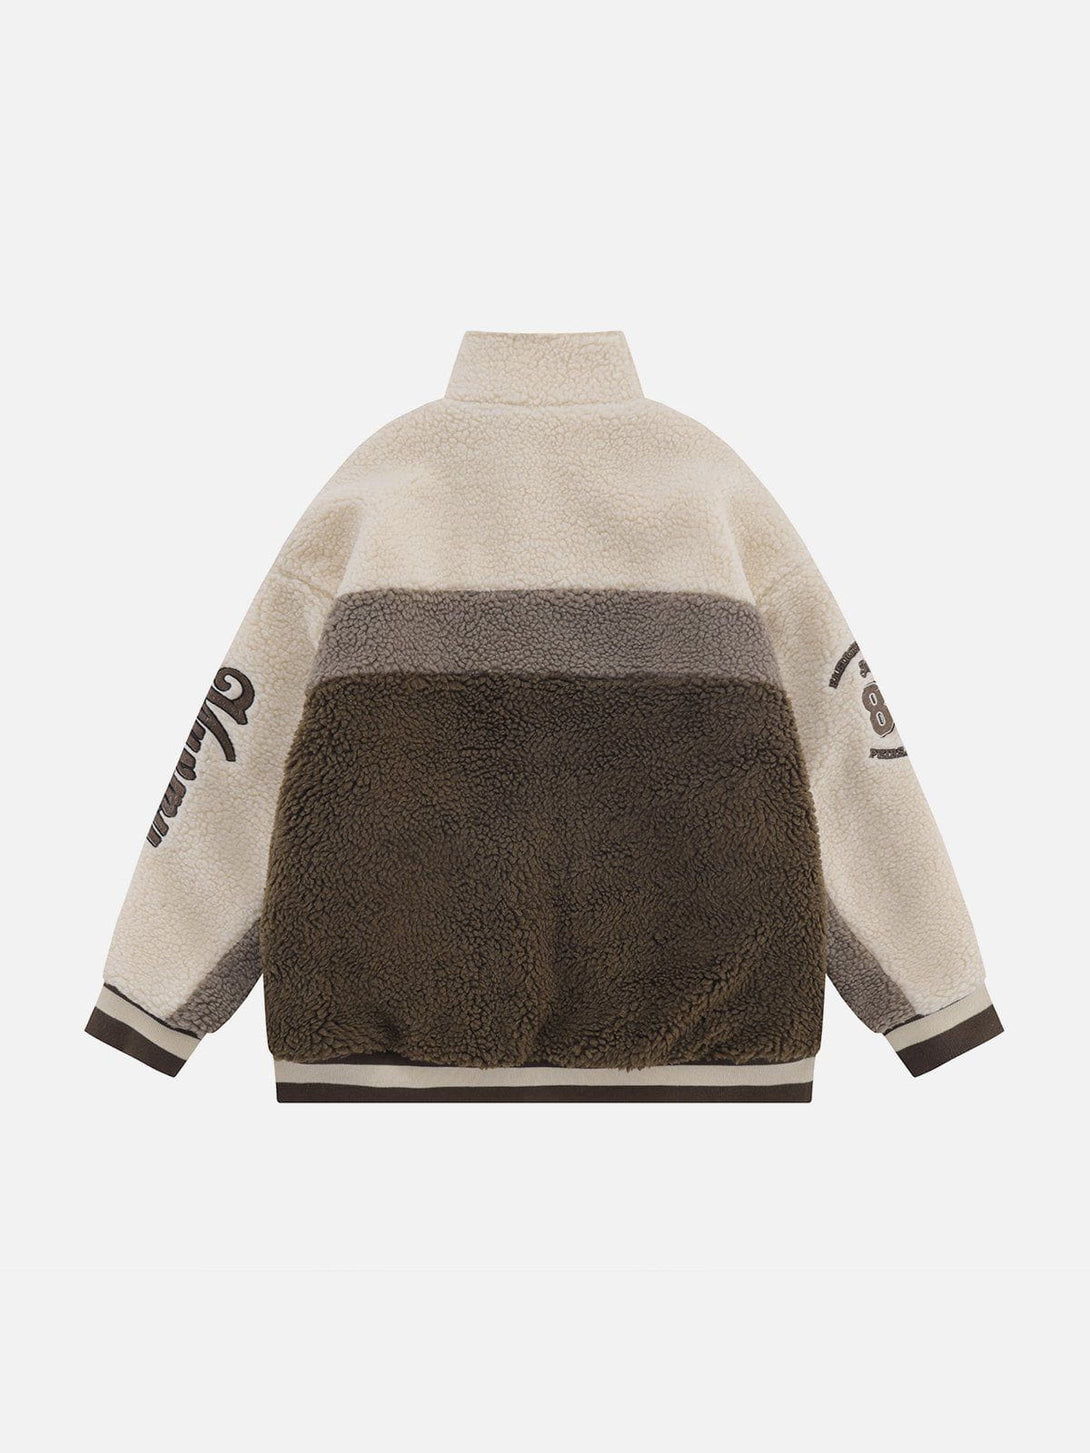 Levefly - Gradient Patchwork Embroidered Sherpa Coat - Streetwear Fashion - levefly.com